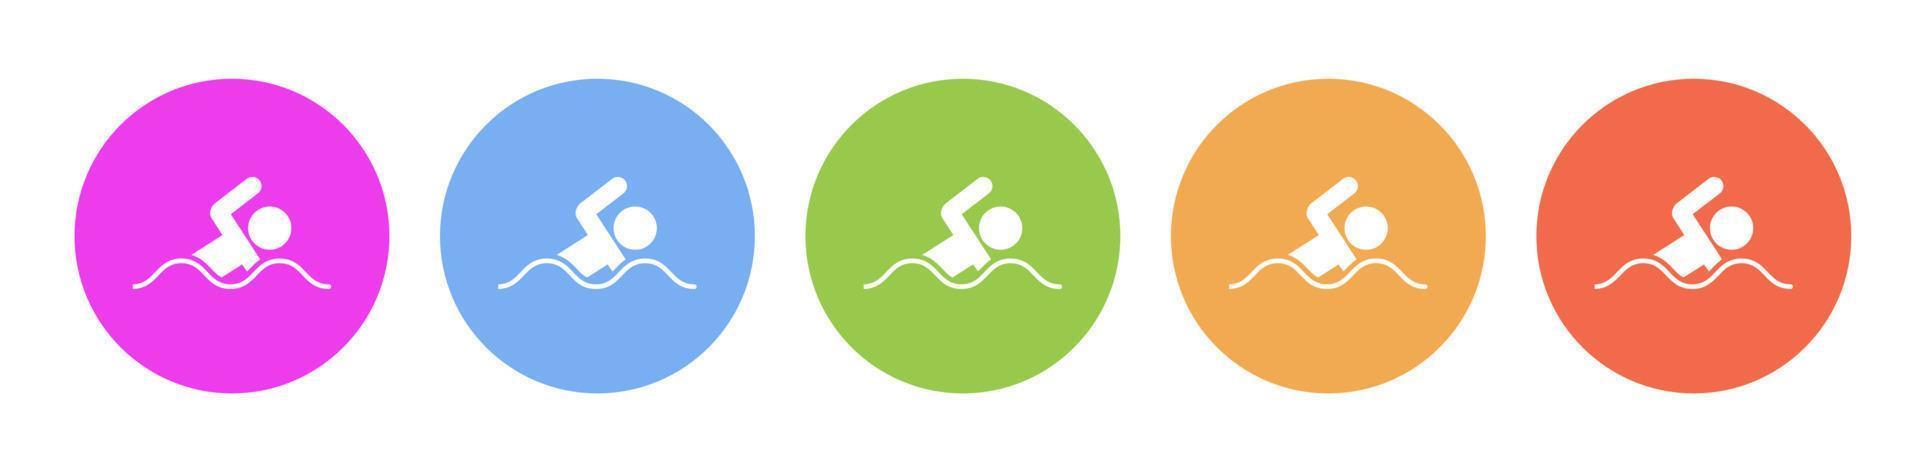 Multi colored flat icons on round backgrounds. Swim, man multicolor circle vector icon on white background